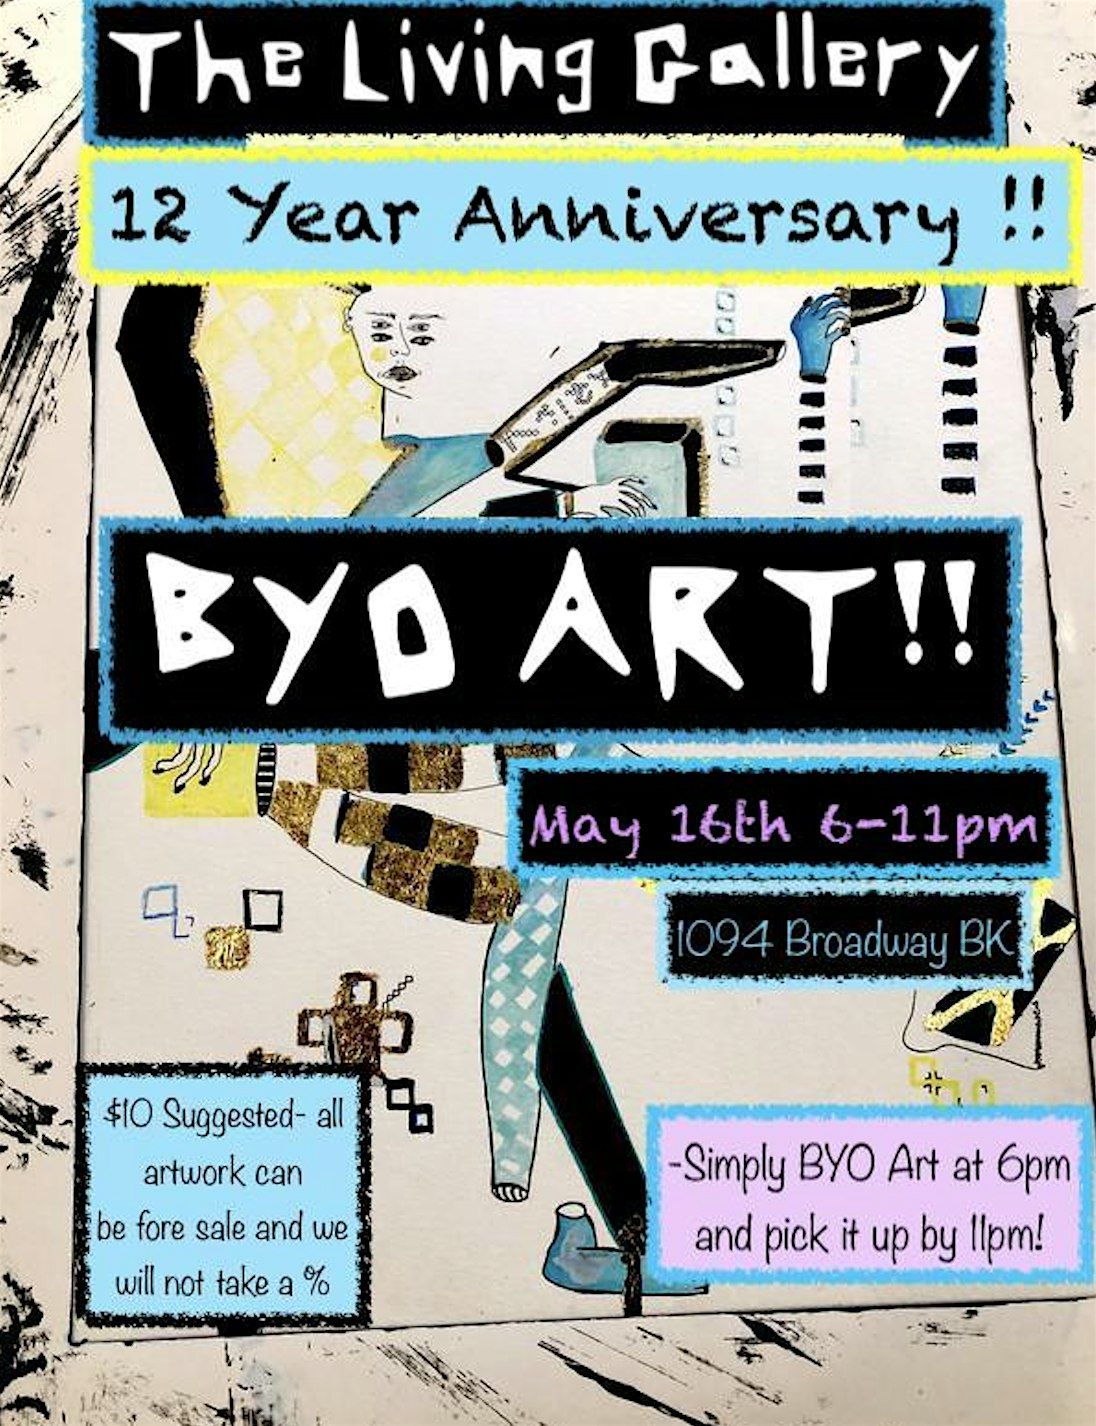 BYO ART for The Living Gallery's 12 Year Anniversary!